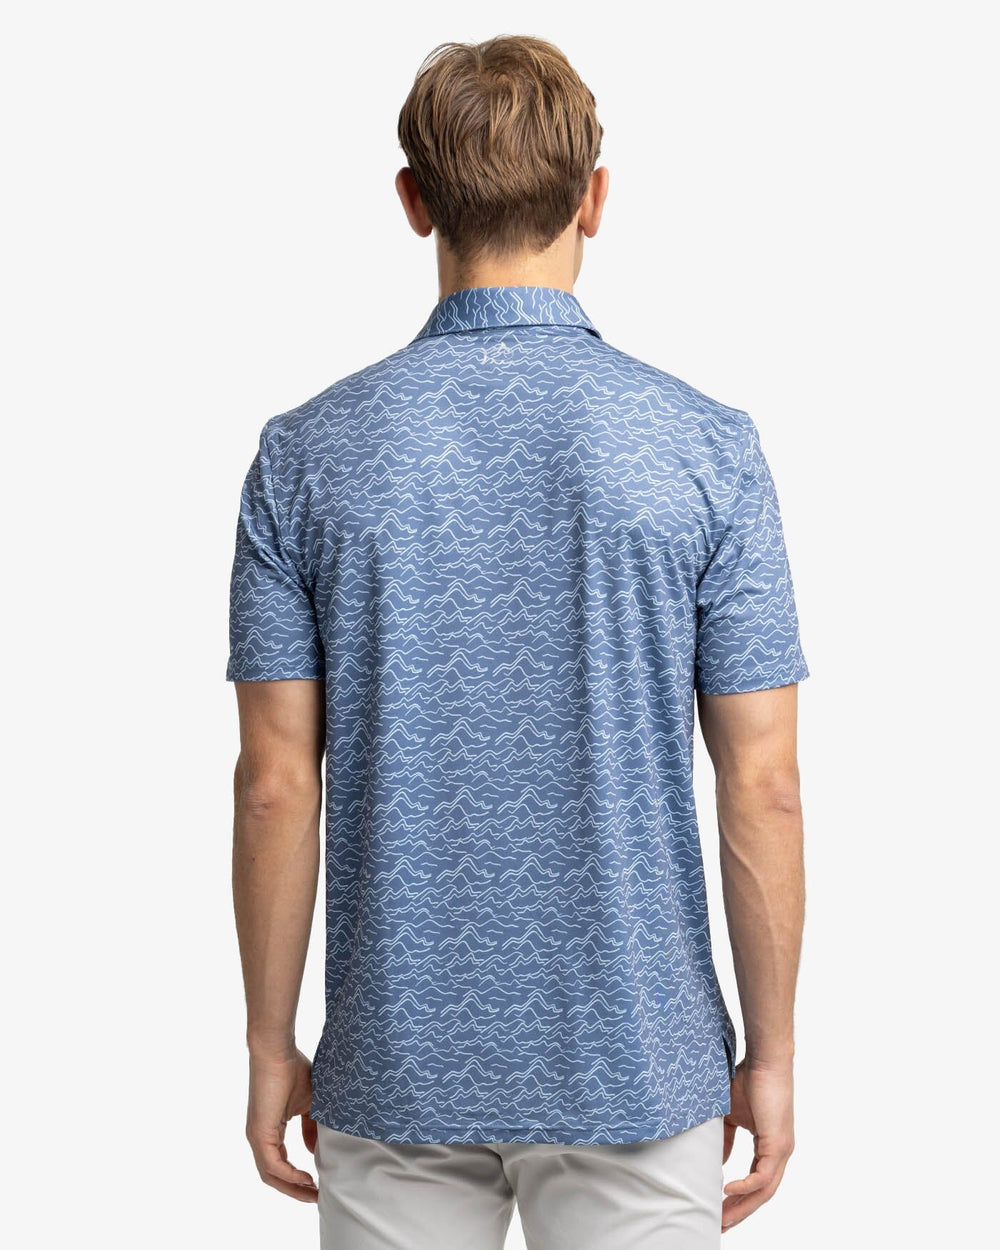 The back view of the Southern Tide Driver Change Your Altitude Printed Polo by Southern Tide - Blue Haze